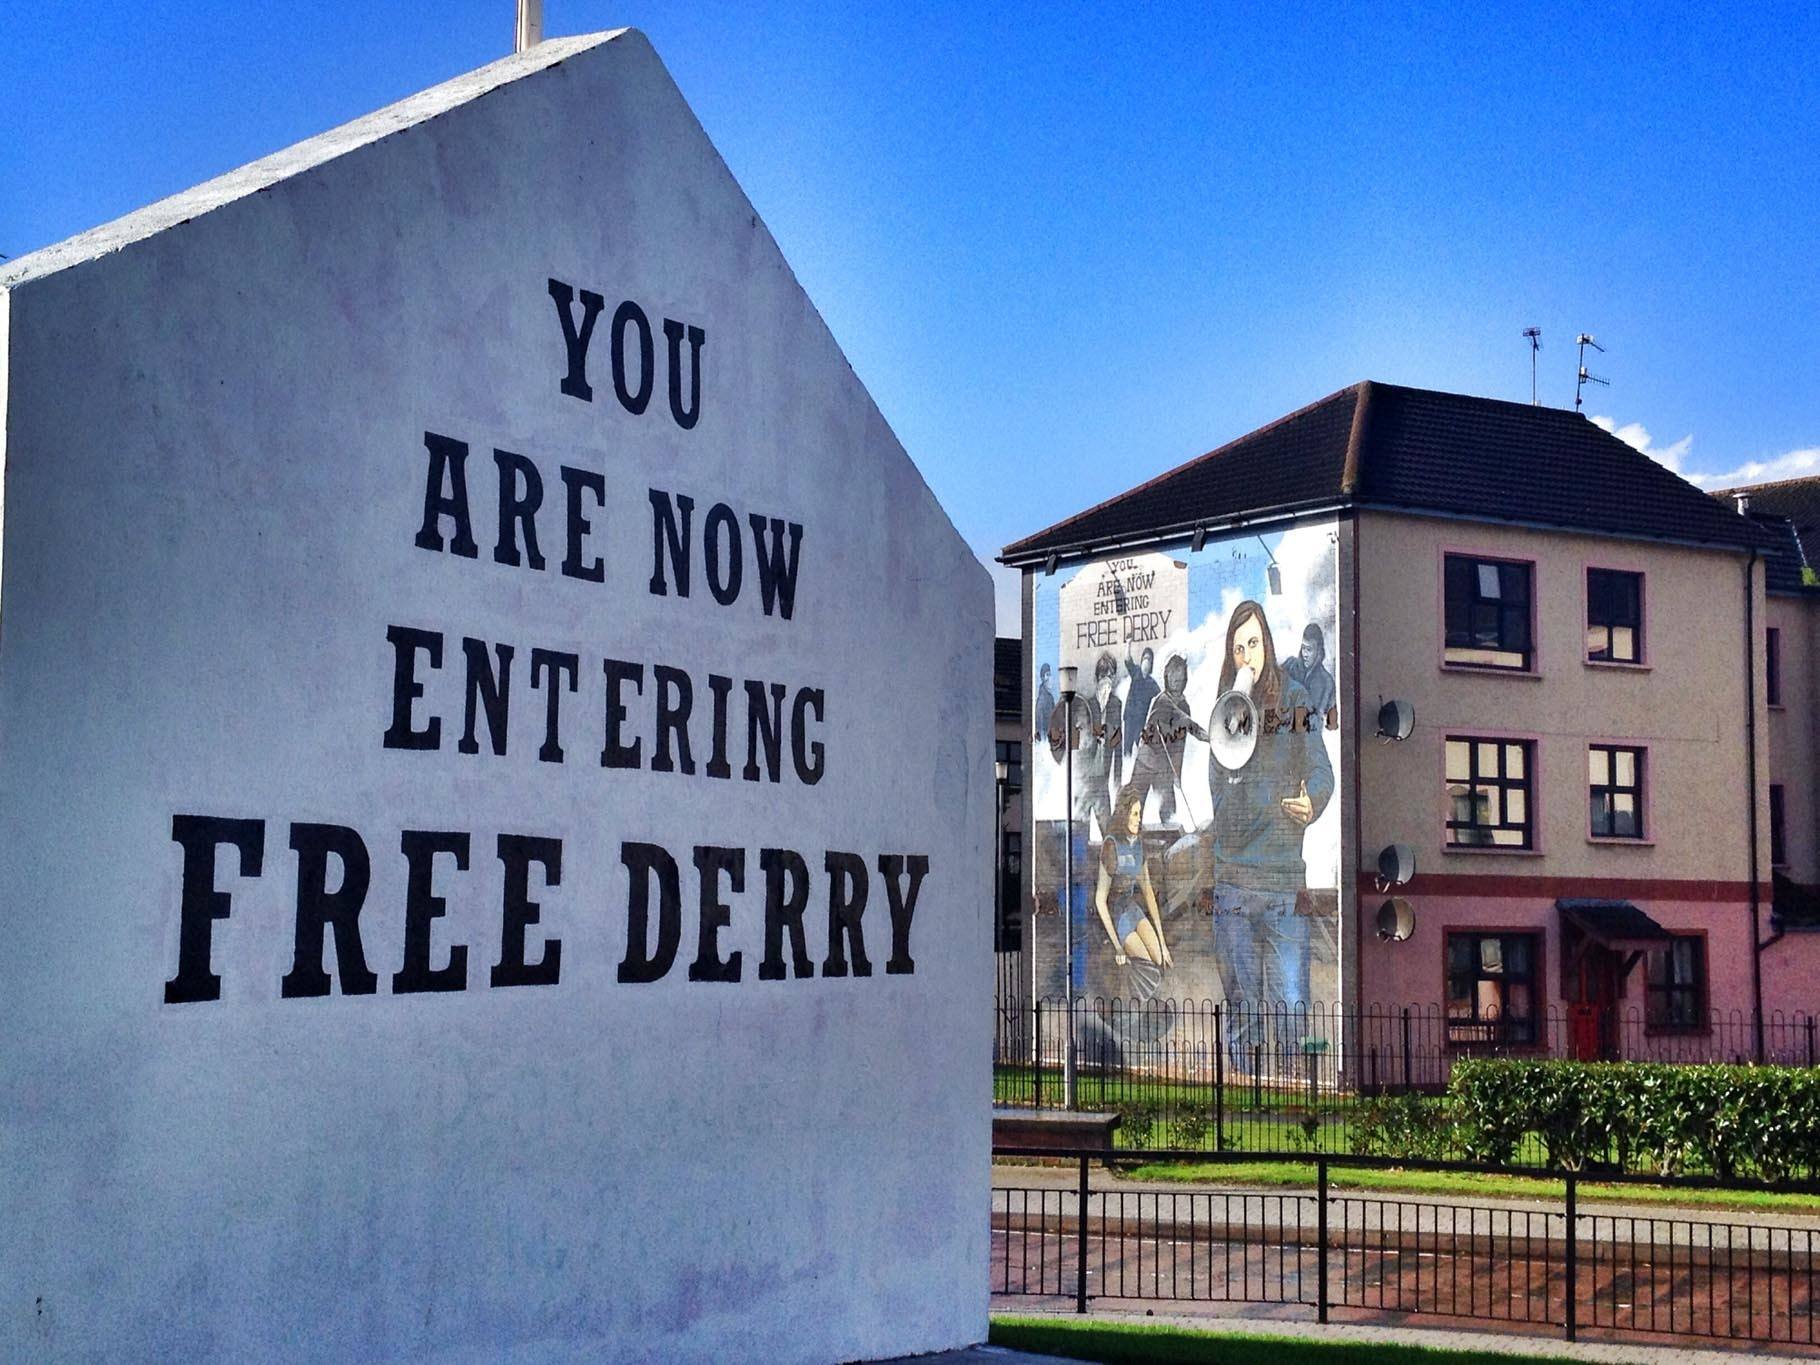 You Are Now Entering Free Derry, the most famous Derry mural